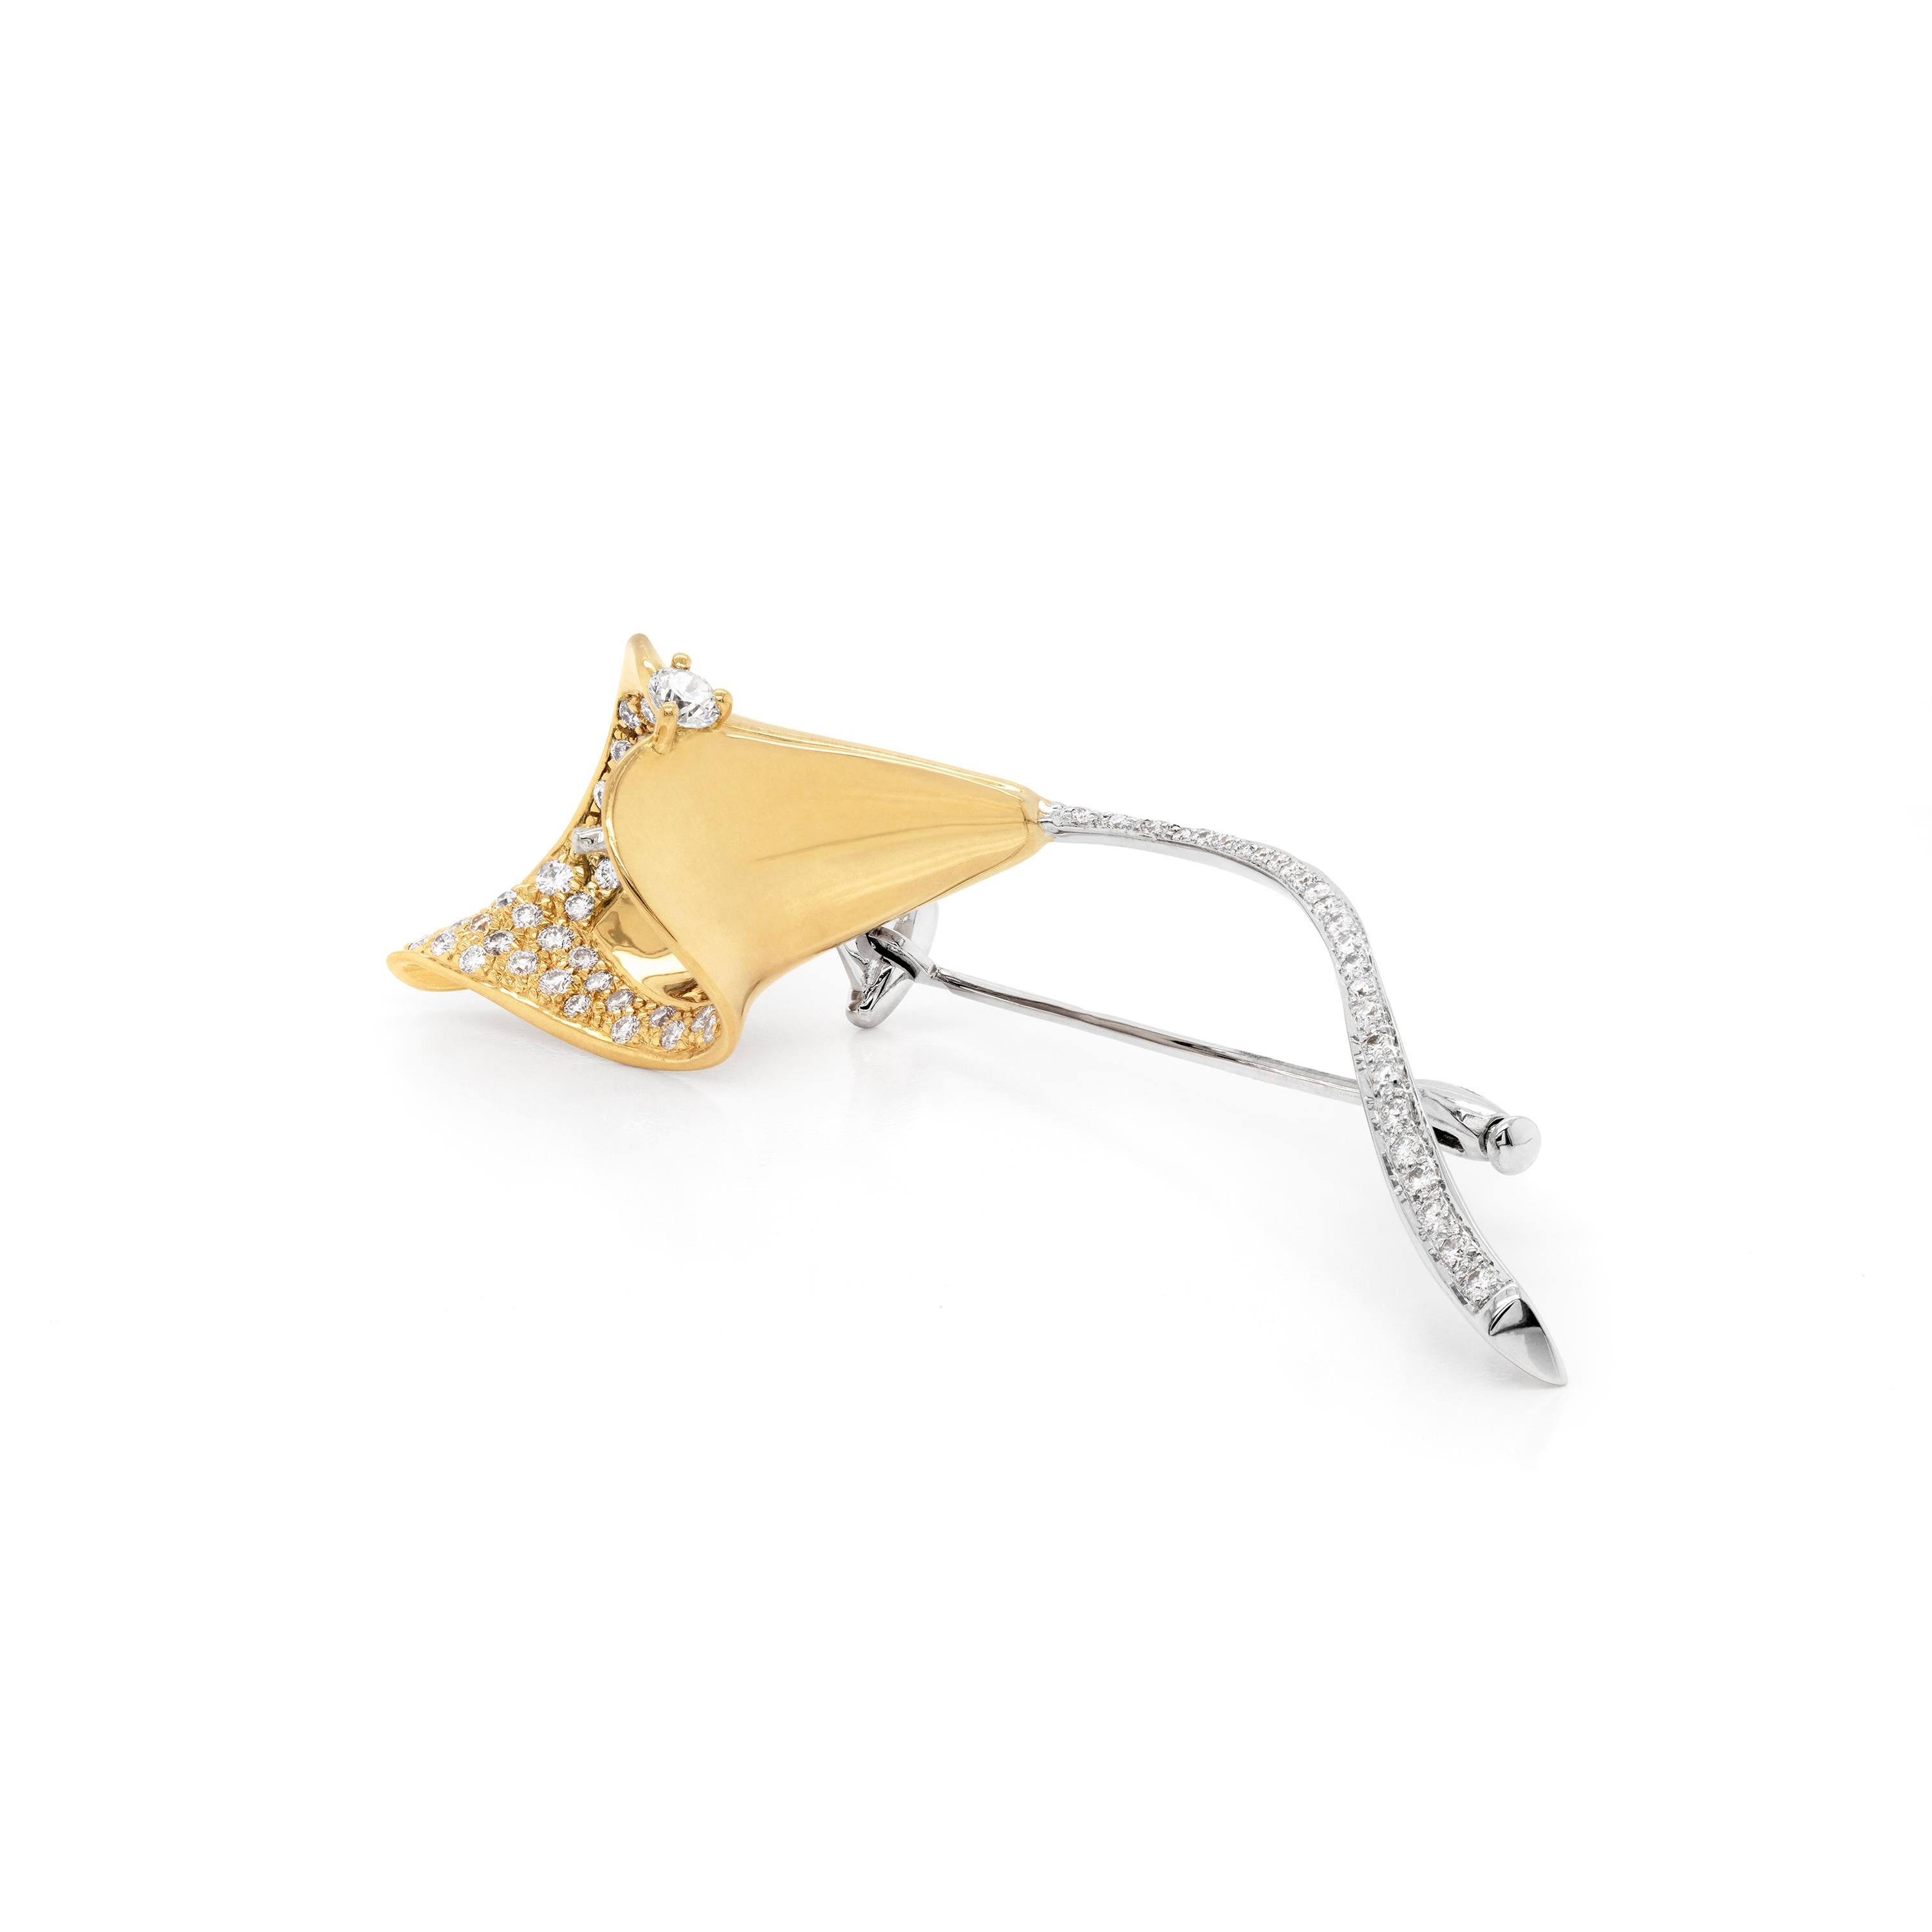 This stunning calla lily flower brooch is made in 18 carat yellow gold with a white gold stem. The brooch is designed as a stylised calla lily, the delicate stem set with a row of round brilliant cut diamonds, and the flower head further jewelled